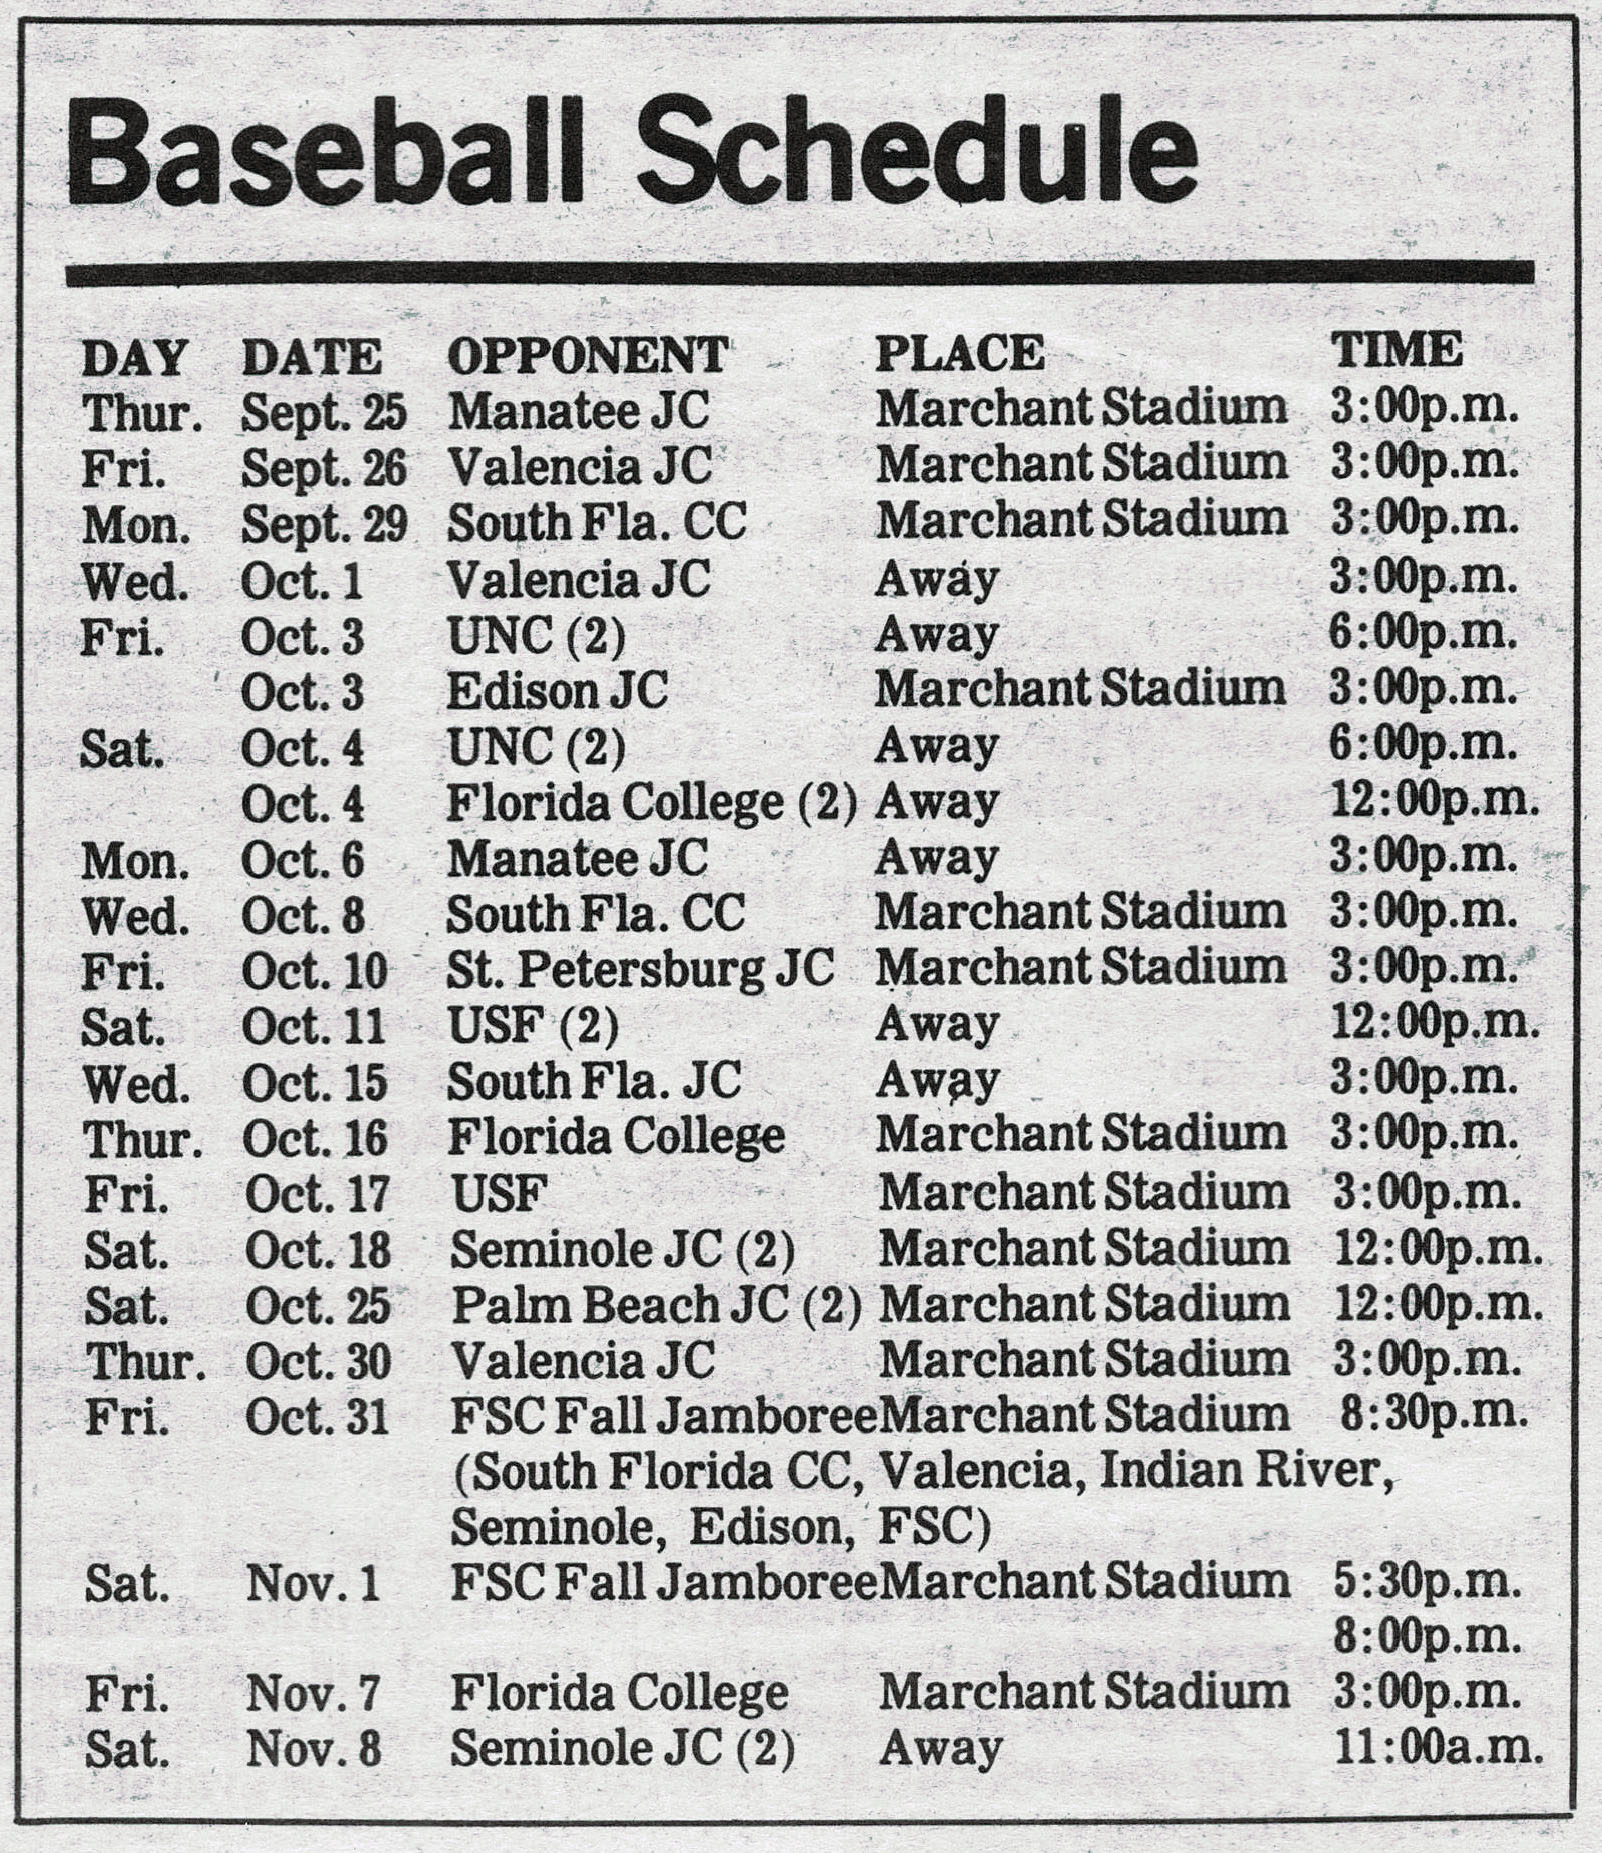 Baseball Schedule DAY DATE OPPONENT PLACE TIME Thur. Sept. 25 Manatee JC Marchant Stadium 3:30p.m. Fri. Sept. 26 Valencia JC Marchant Stadium 3:00p.m. Mon. Sept. 29 South Fla. CC Marchant Stadium 3:00p.m. Wed. Oct.1 Valencia JC Away 3:00p.m. Fri. Oct. 3 UNC (2) Away 6:00p.m. Oct. 3 Edison JC Marchant Stadium 3:00p.m. Sat. Oct. 4 UNC (2) Away 6:00p.m. Oct. 4 Florida College (2) Away 12:00p.m. Mon. Oct. 6 Manatee JC Away 3:00p.m. Wed. Oct. 8 South Fla. CC Marchant Stadium 3:00p.m. Fri. Oct. 10 St. Petersburg JC Marchant Stadium 3:00p.m. Sat. Oct. 11 USF (2) Away 12:00p.m. Wed. Oct. 15 South Fla. JC Away 3:00p.m. Thur. Oct. 15 Florida College Marchant Stadium 3:00p.m. Fri. Oct. 17 USF Marchant Stadium 3:00p.m. Sat. Oct. 18 Seminole JC (2) Marchant Stadium 12:00p.m. Sat. Oct. 25 Palm Beach JC (2) Marchant Stadium 12:00p.m. Thur. Oct. 30 Valencia JC Marchant Stadium 3:00p.m. Fri. Oct. 31 FSC Fall Jamboree (South Florida CC, Valencia, Indian River, Seminole, Edison, FSC) Marchant Stadium 8:30p.m. Sat. Nov. 1 FSC Fall Jamboree Marchant Stadium 5:30p.m. 8:00p.m. Fri. Nov. 7 Florida College Marchant Stadium 3:00p.m. Sat. Nov. 8 Seminole JC (2) Away 11:00a.m.